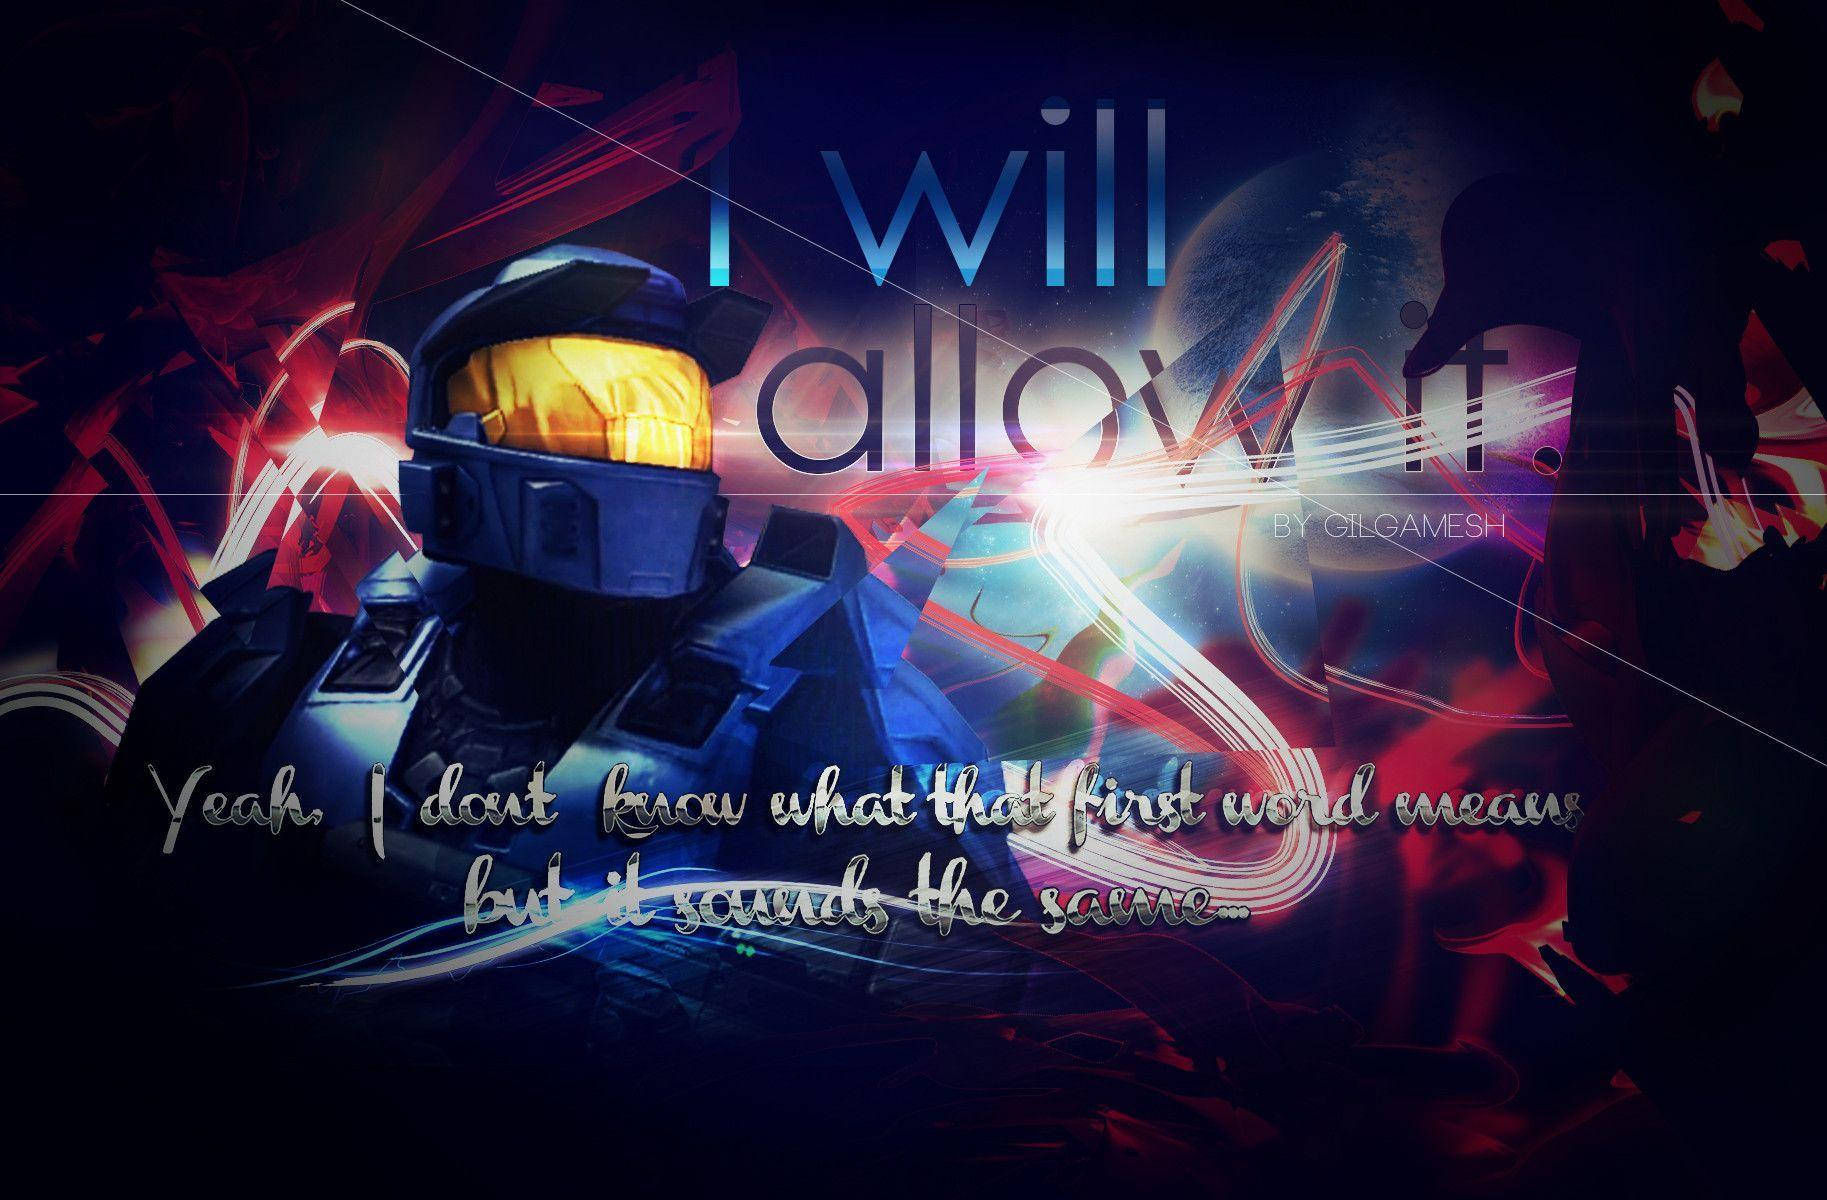 Leonard Church Quotation From Red Vs Blue Background